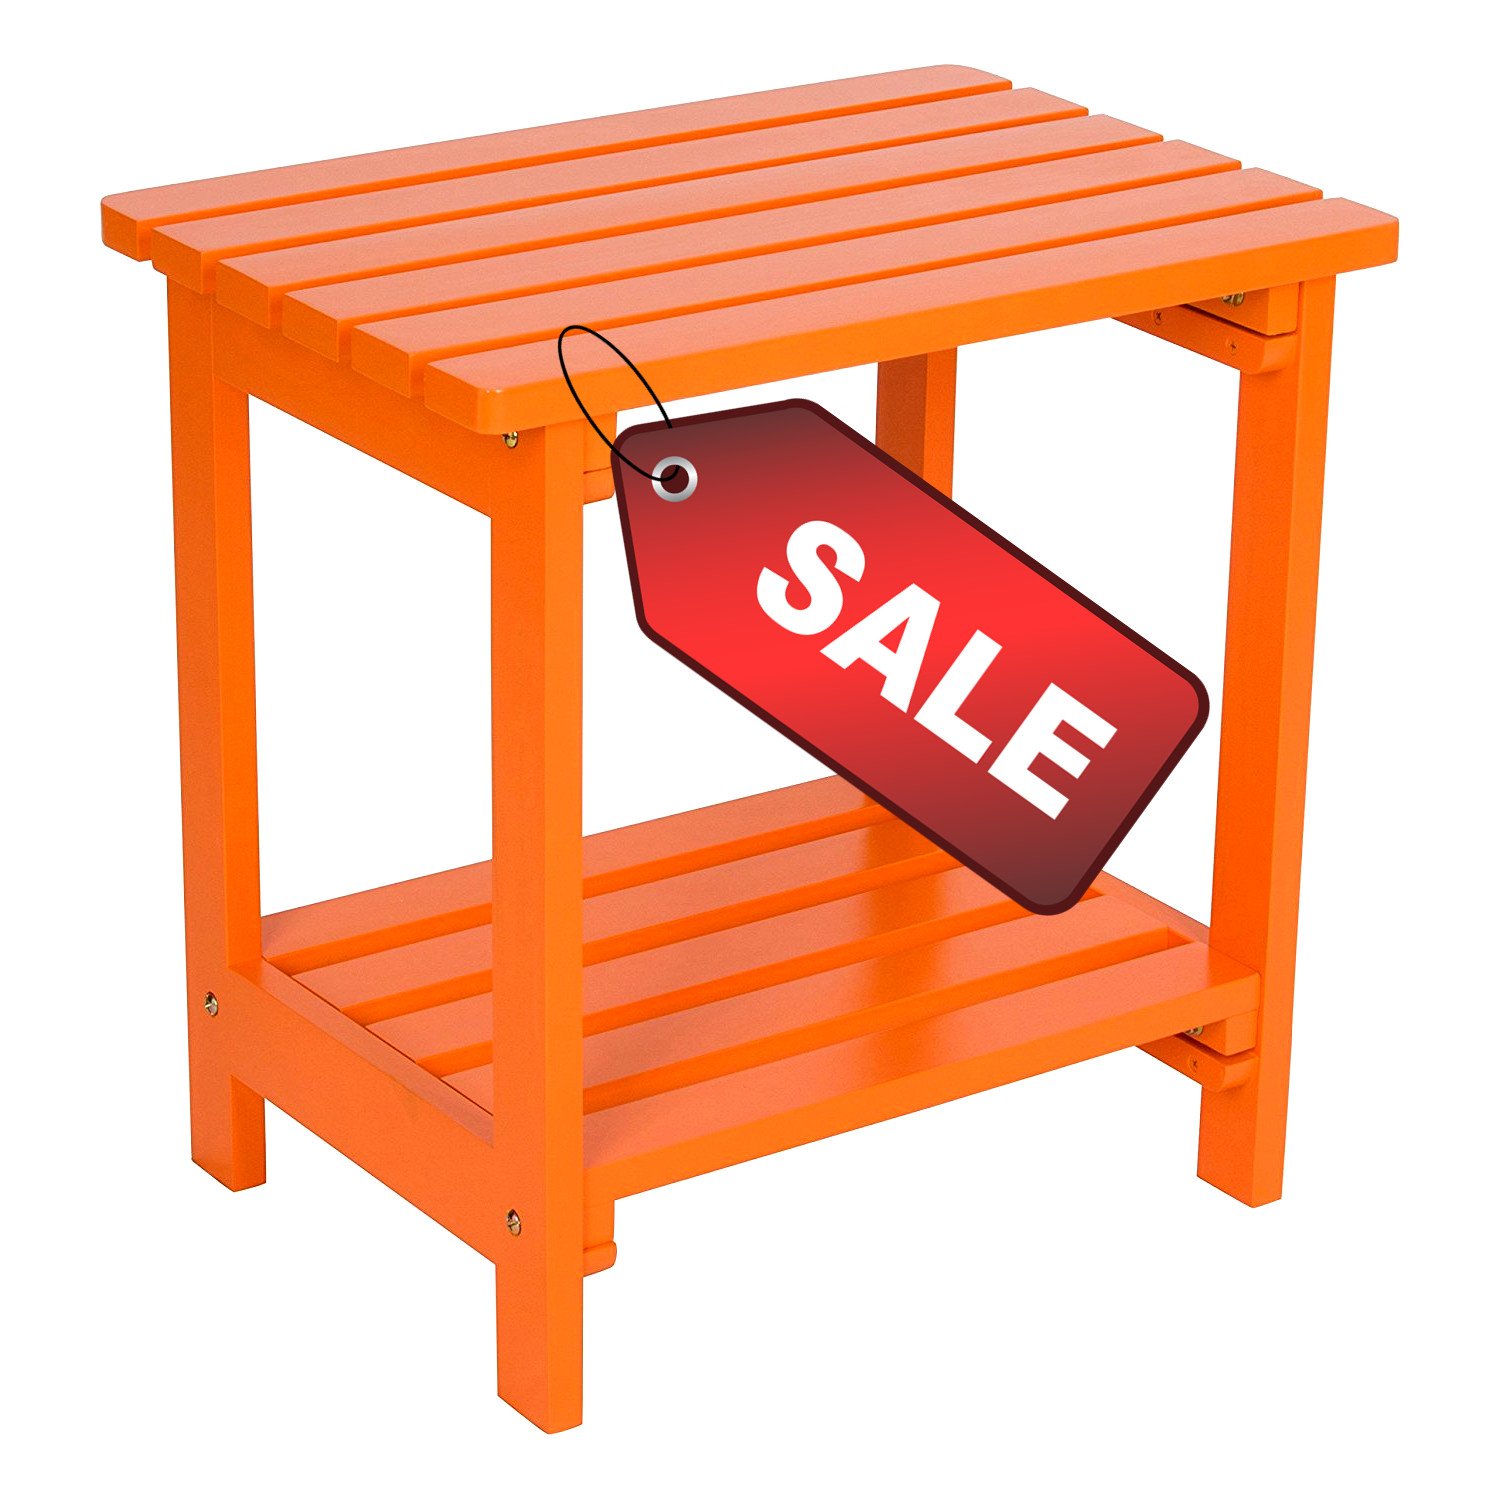 tier patio table small side square accent tables orange wooden water weather rust resistant stylish outdoor indoor furniture ebook butler end set lamps folding bistro affordable